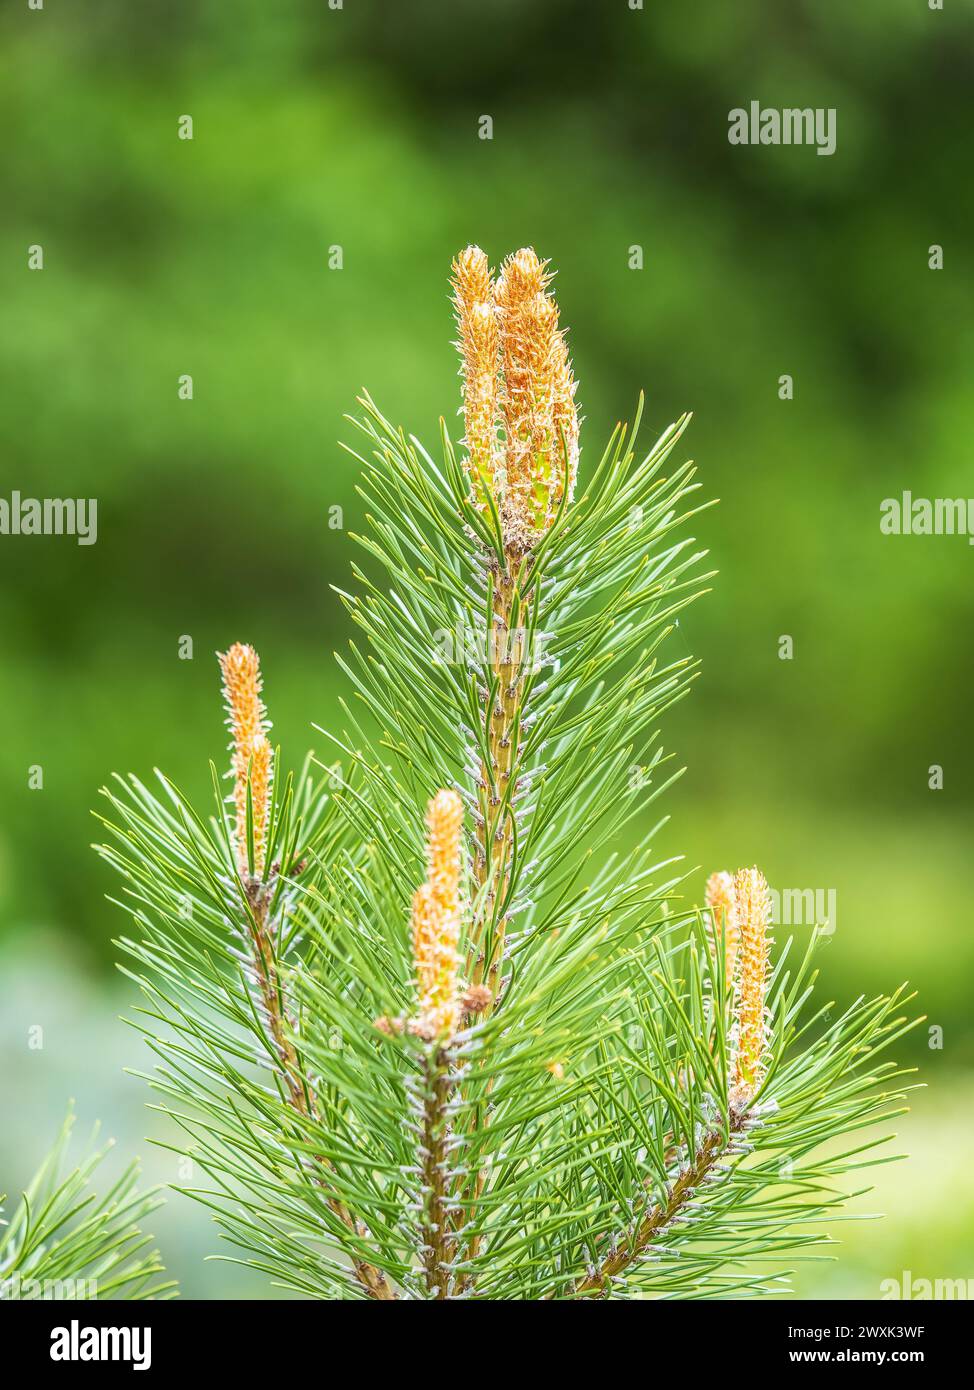 Green small pine trees with fresh shoots in spring or summer. Dense thickets of stunted pines with young branches in the spring in the mountains Stock Photo